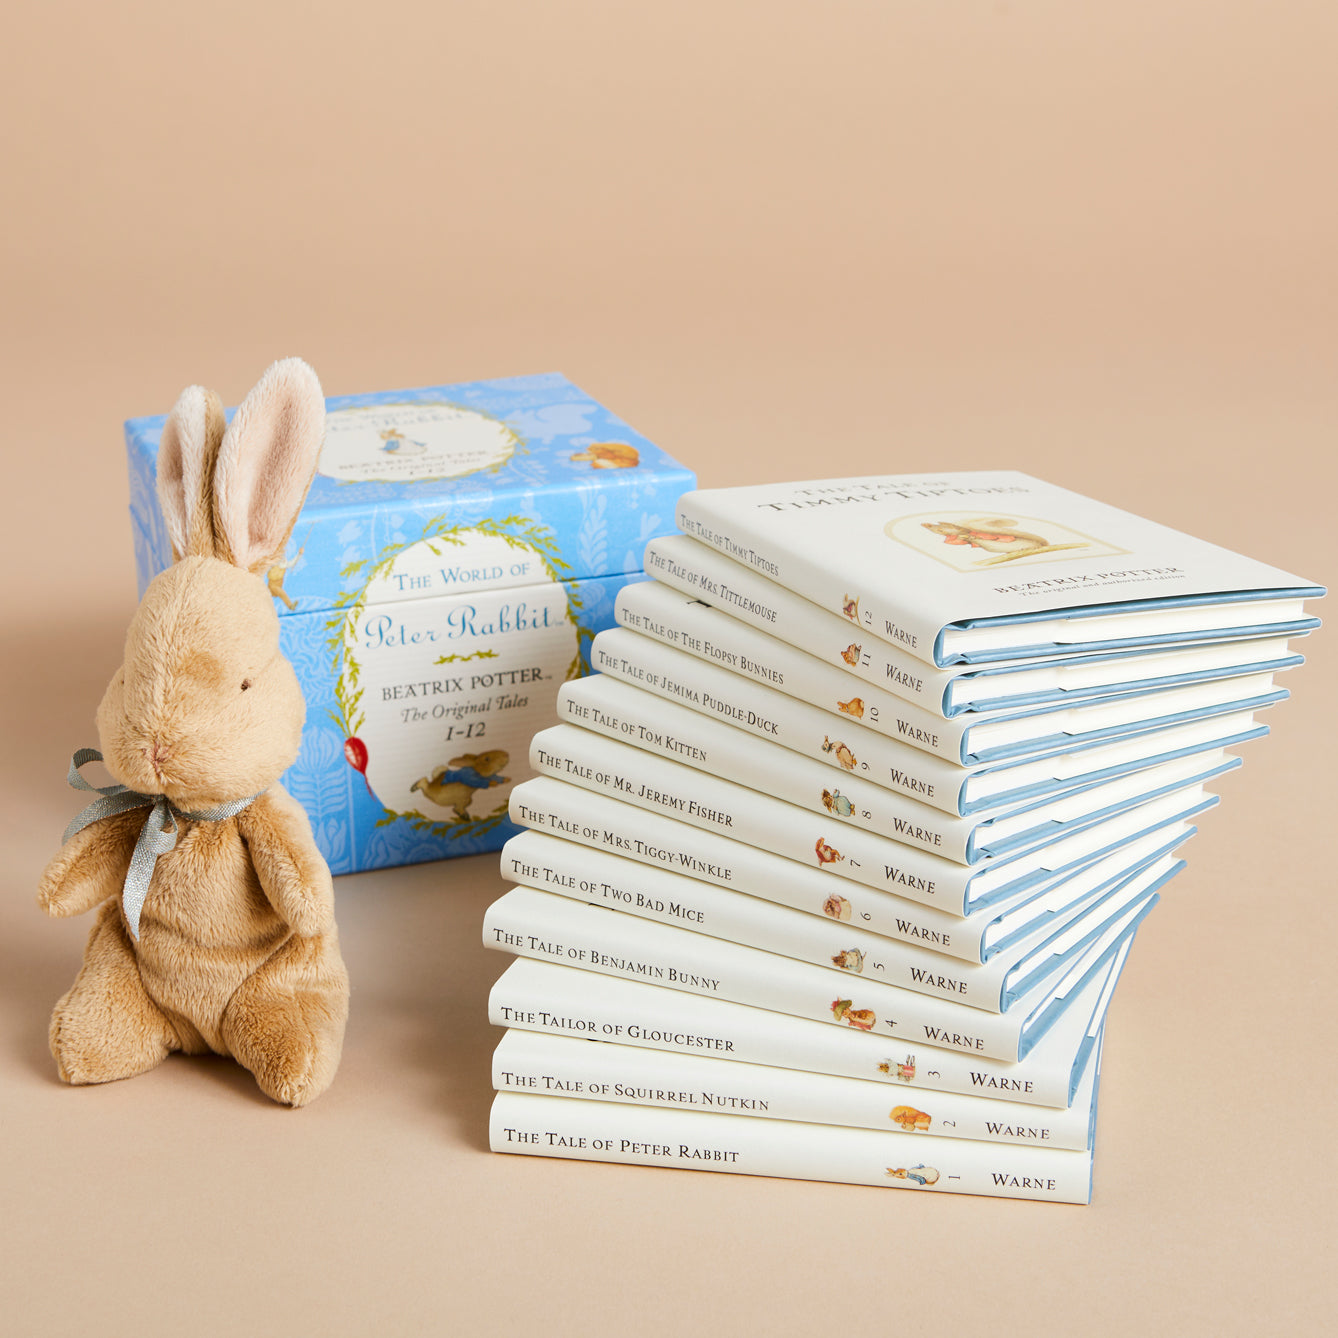 Peter Rabbit box set with small rabbit toy.